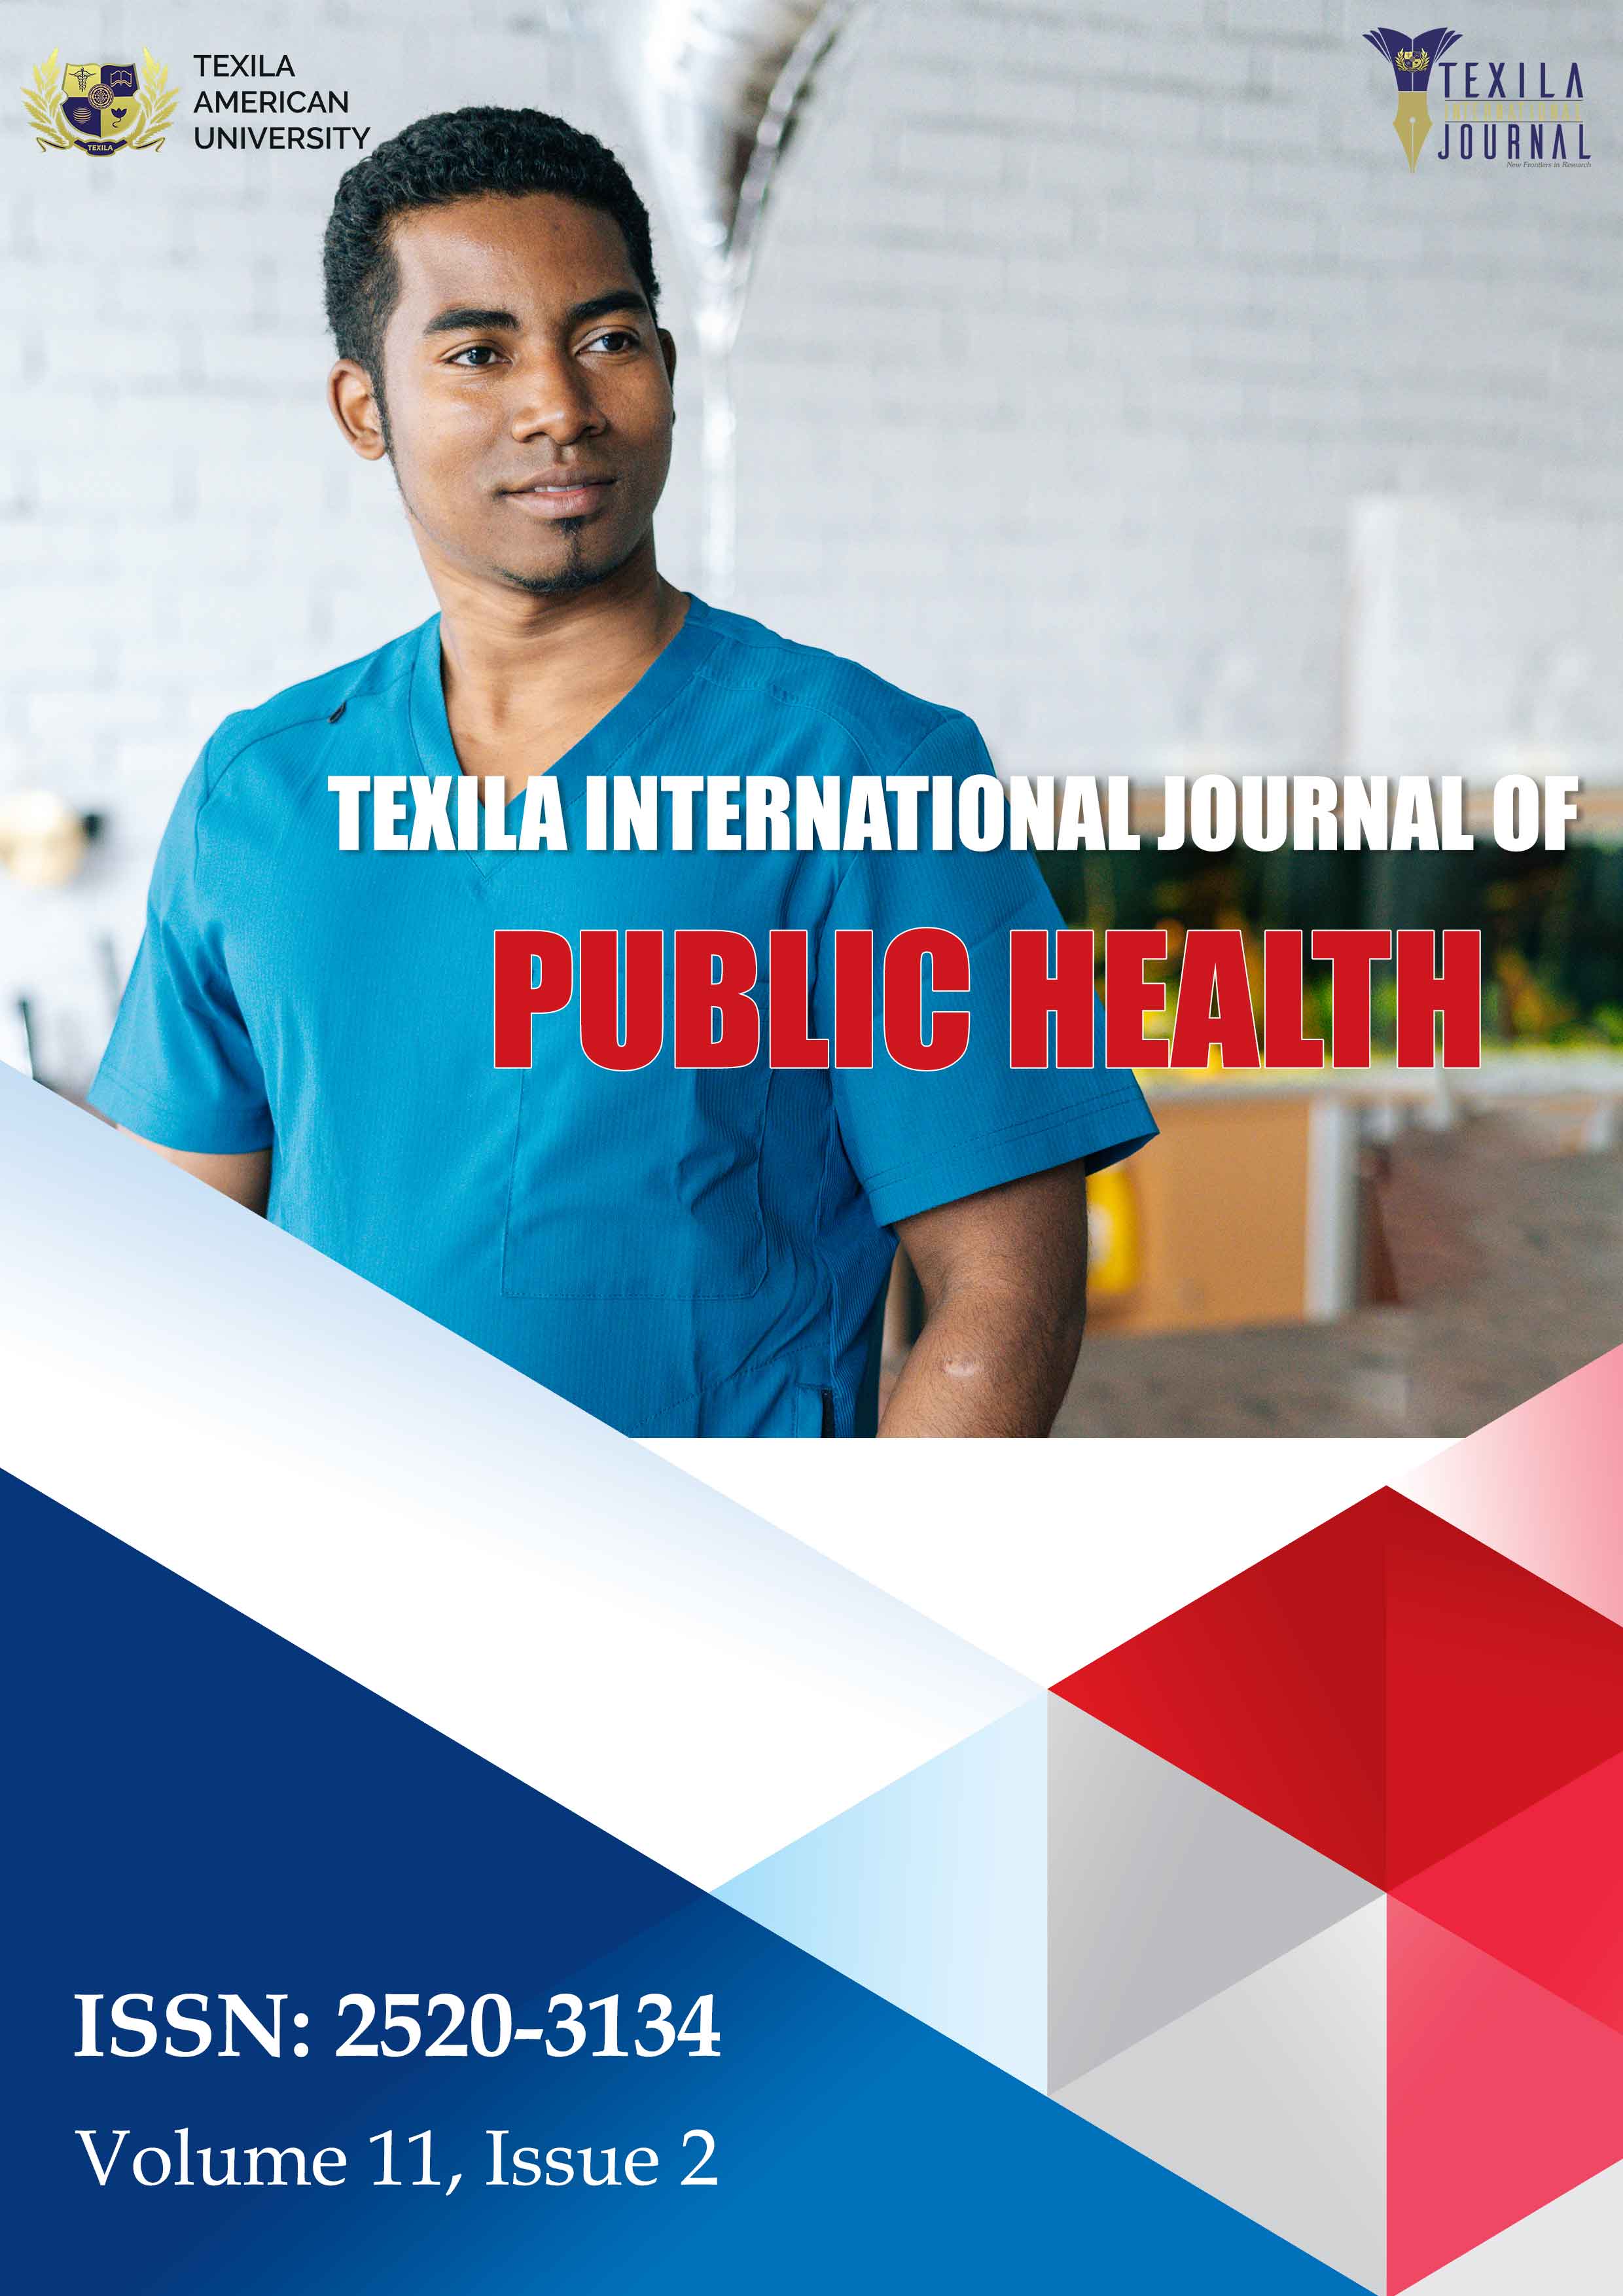 Current Issue Volume 11, Issue 2, TEXILA INTERNATIONAL JOURNAL OF PUBLIC  HEALTH